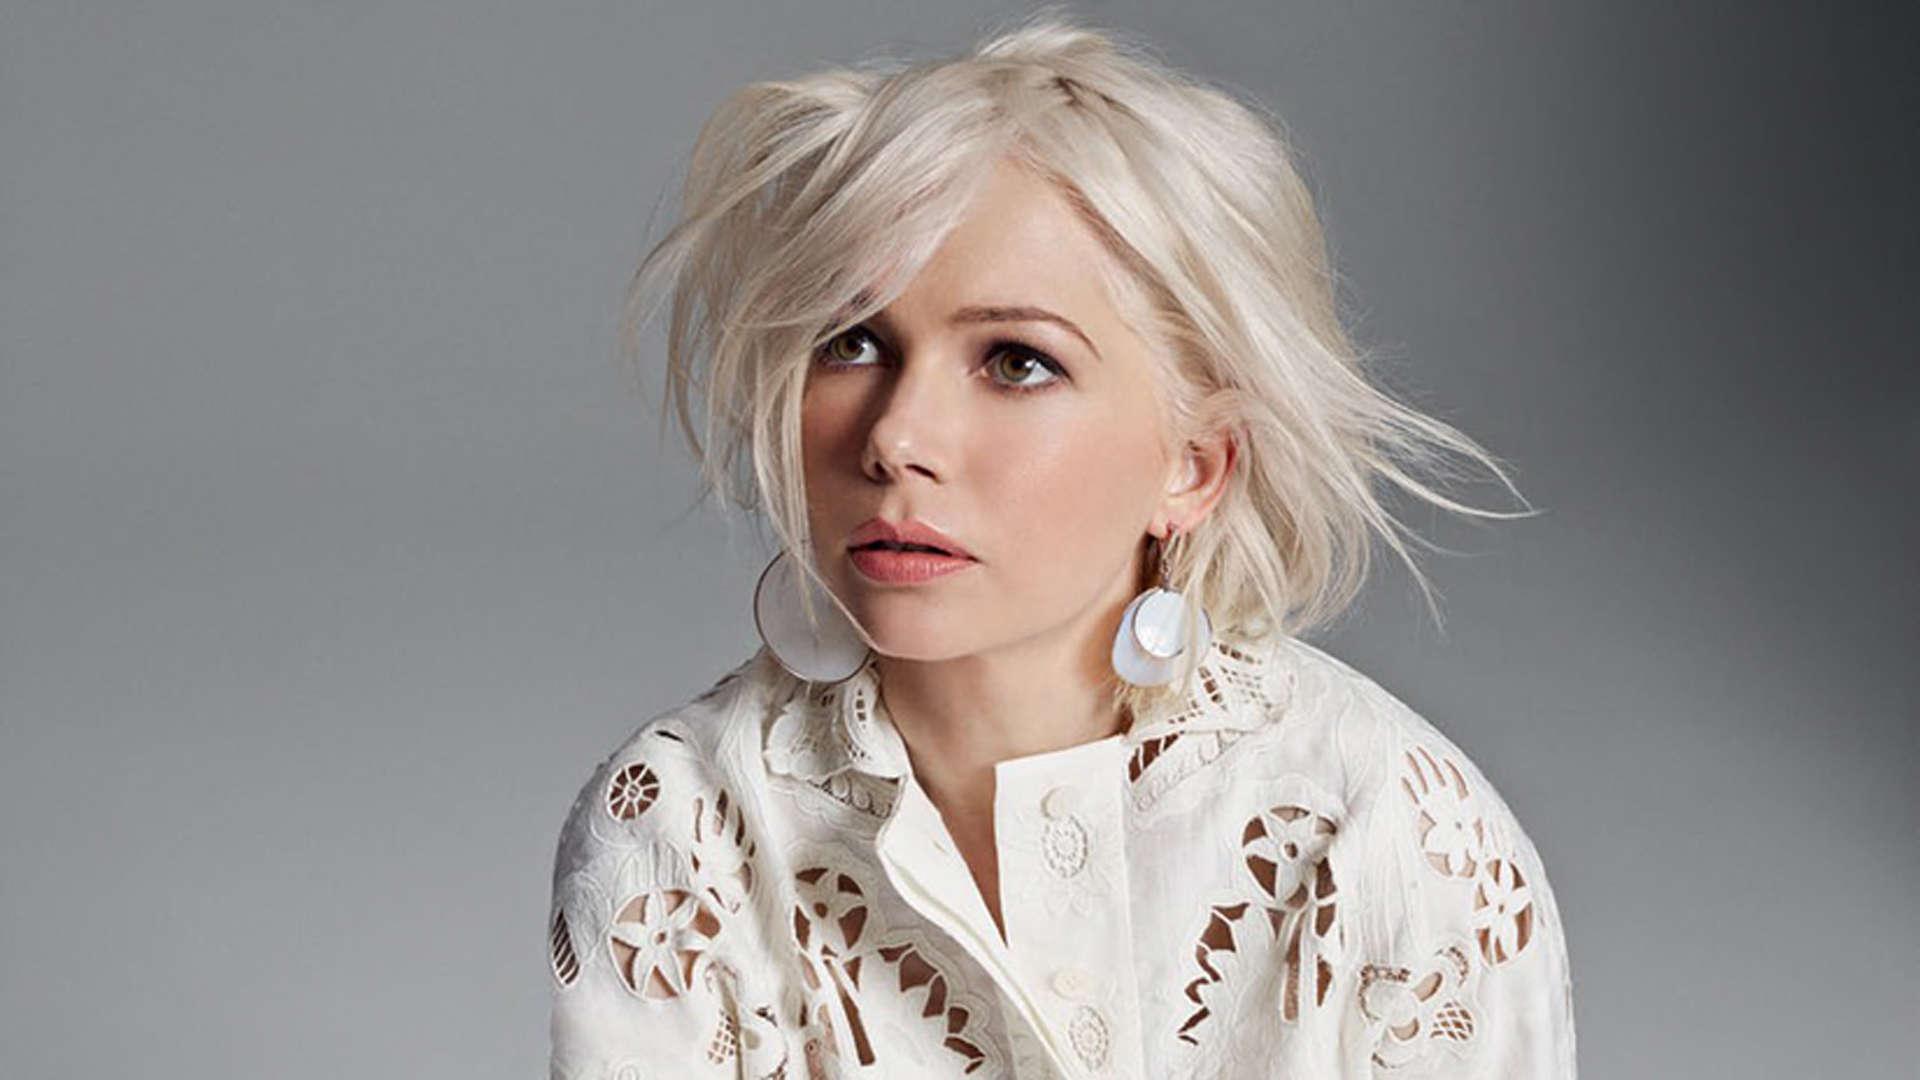 Michelle Williams Wallpaper High Quality